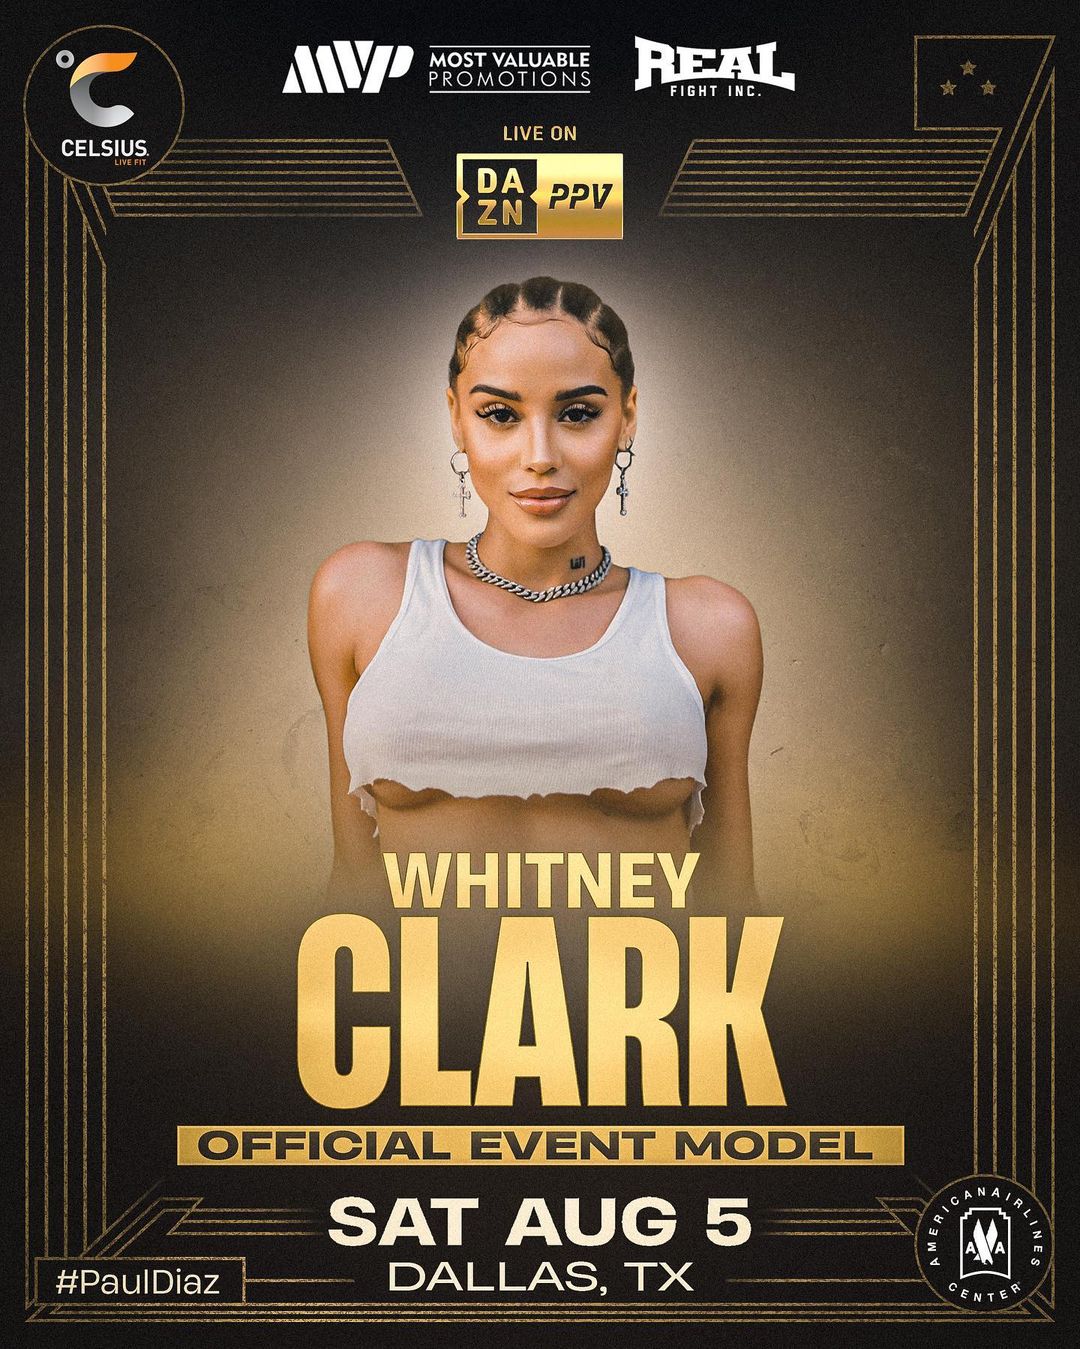 Whitney Clark is another ring girl that has been announced for the event